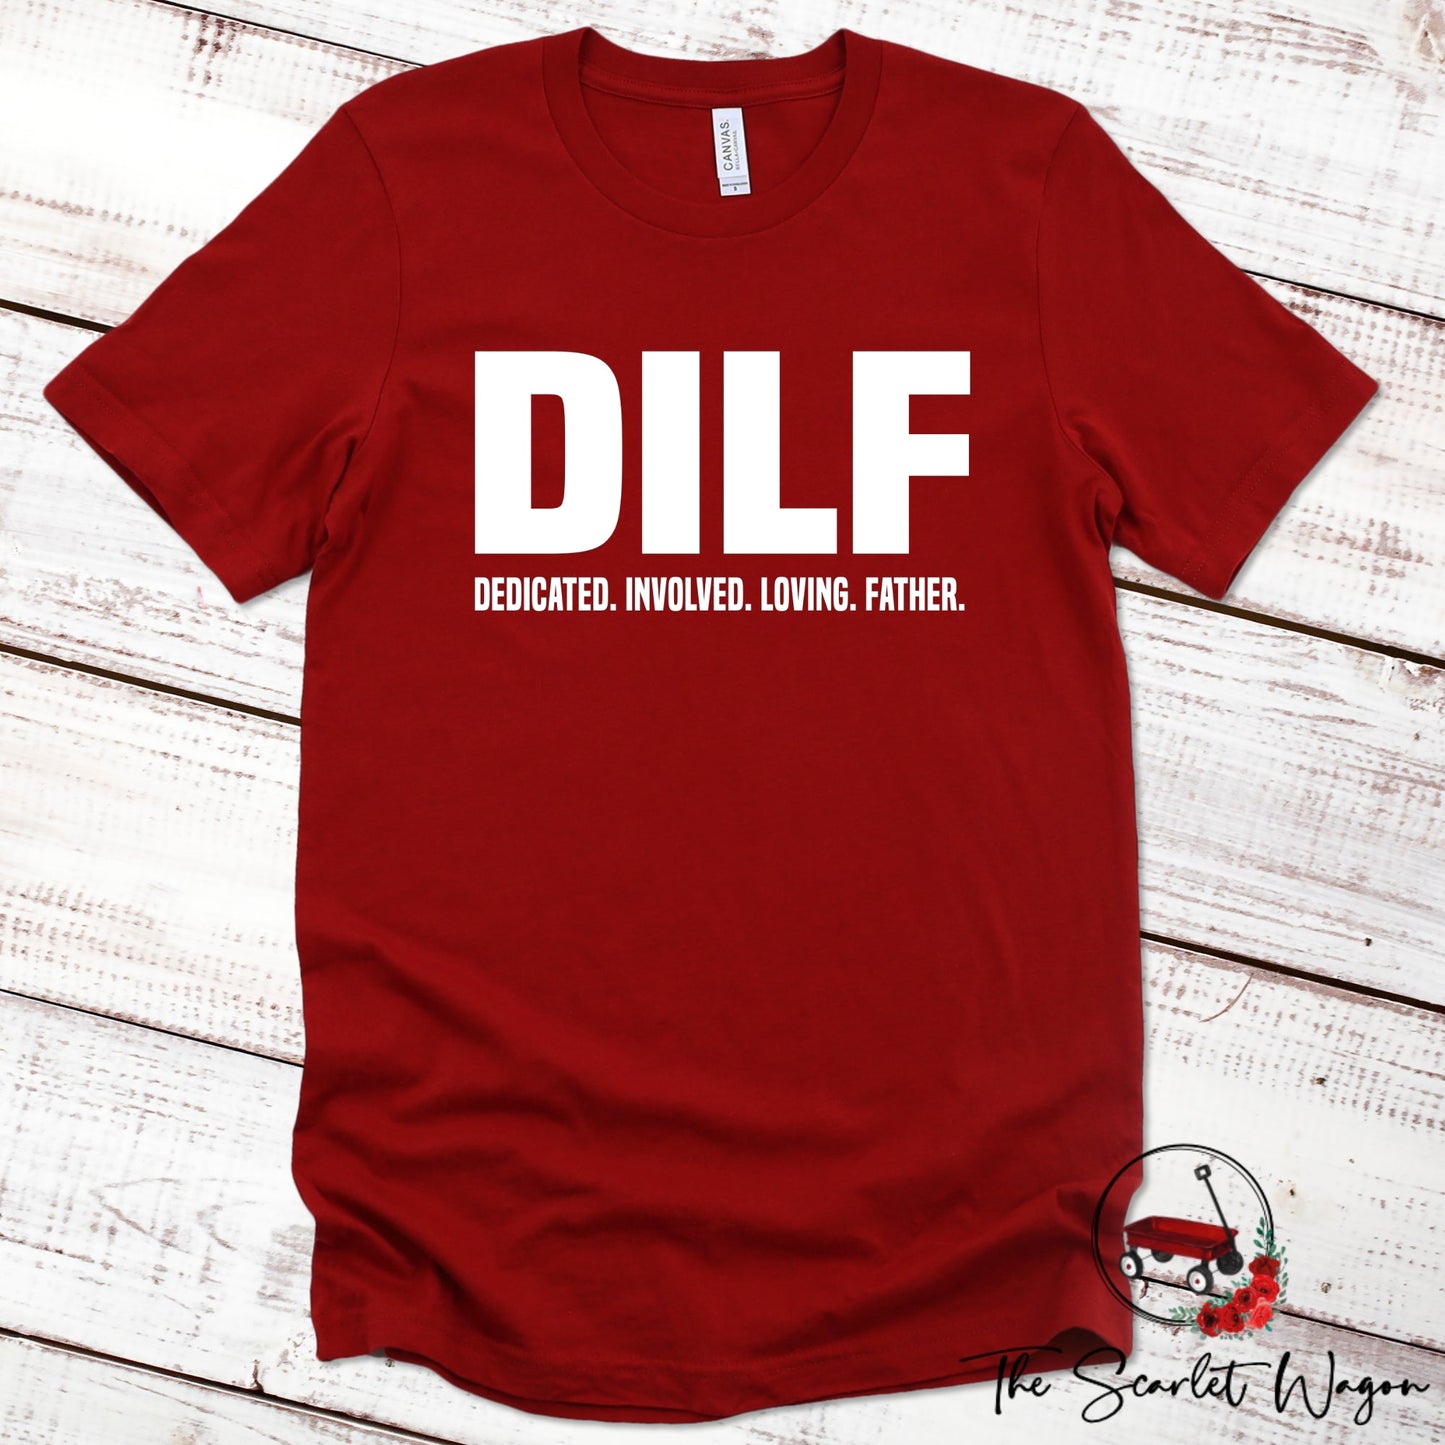 DILF - Dedicated Involved Loving Father Premium Tee Scarlet Wagon Red XS 